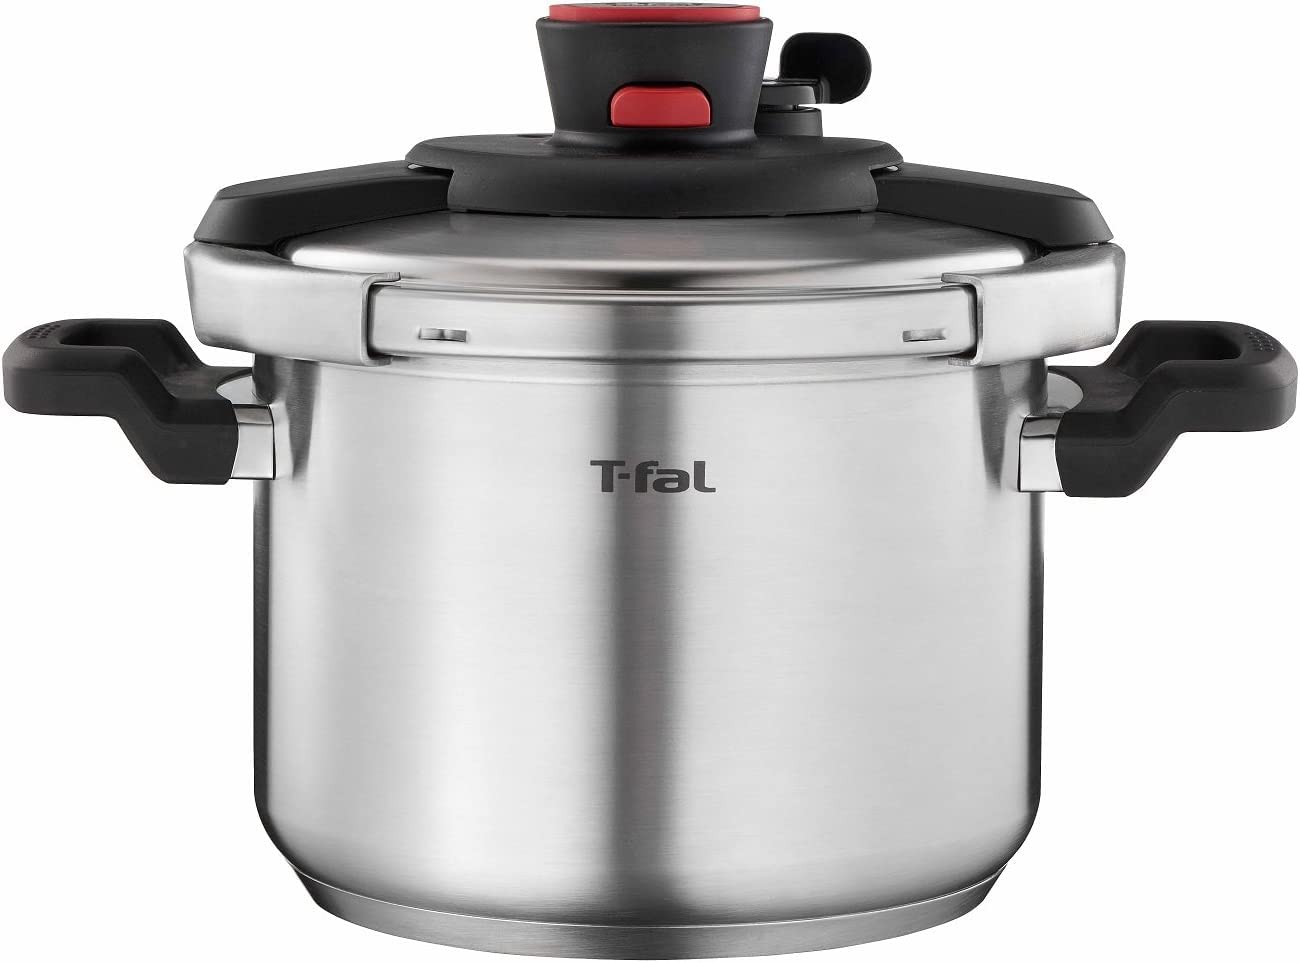 10 best stainless steel pressure cookers tested reviewed 1145 22 4